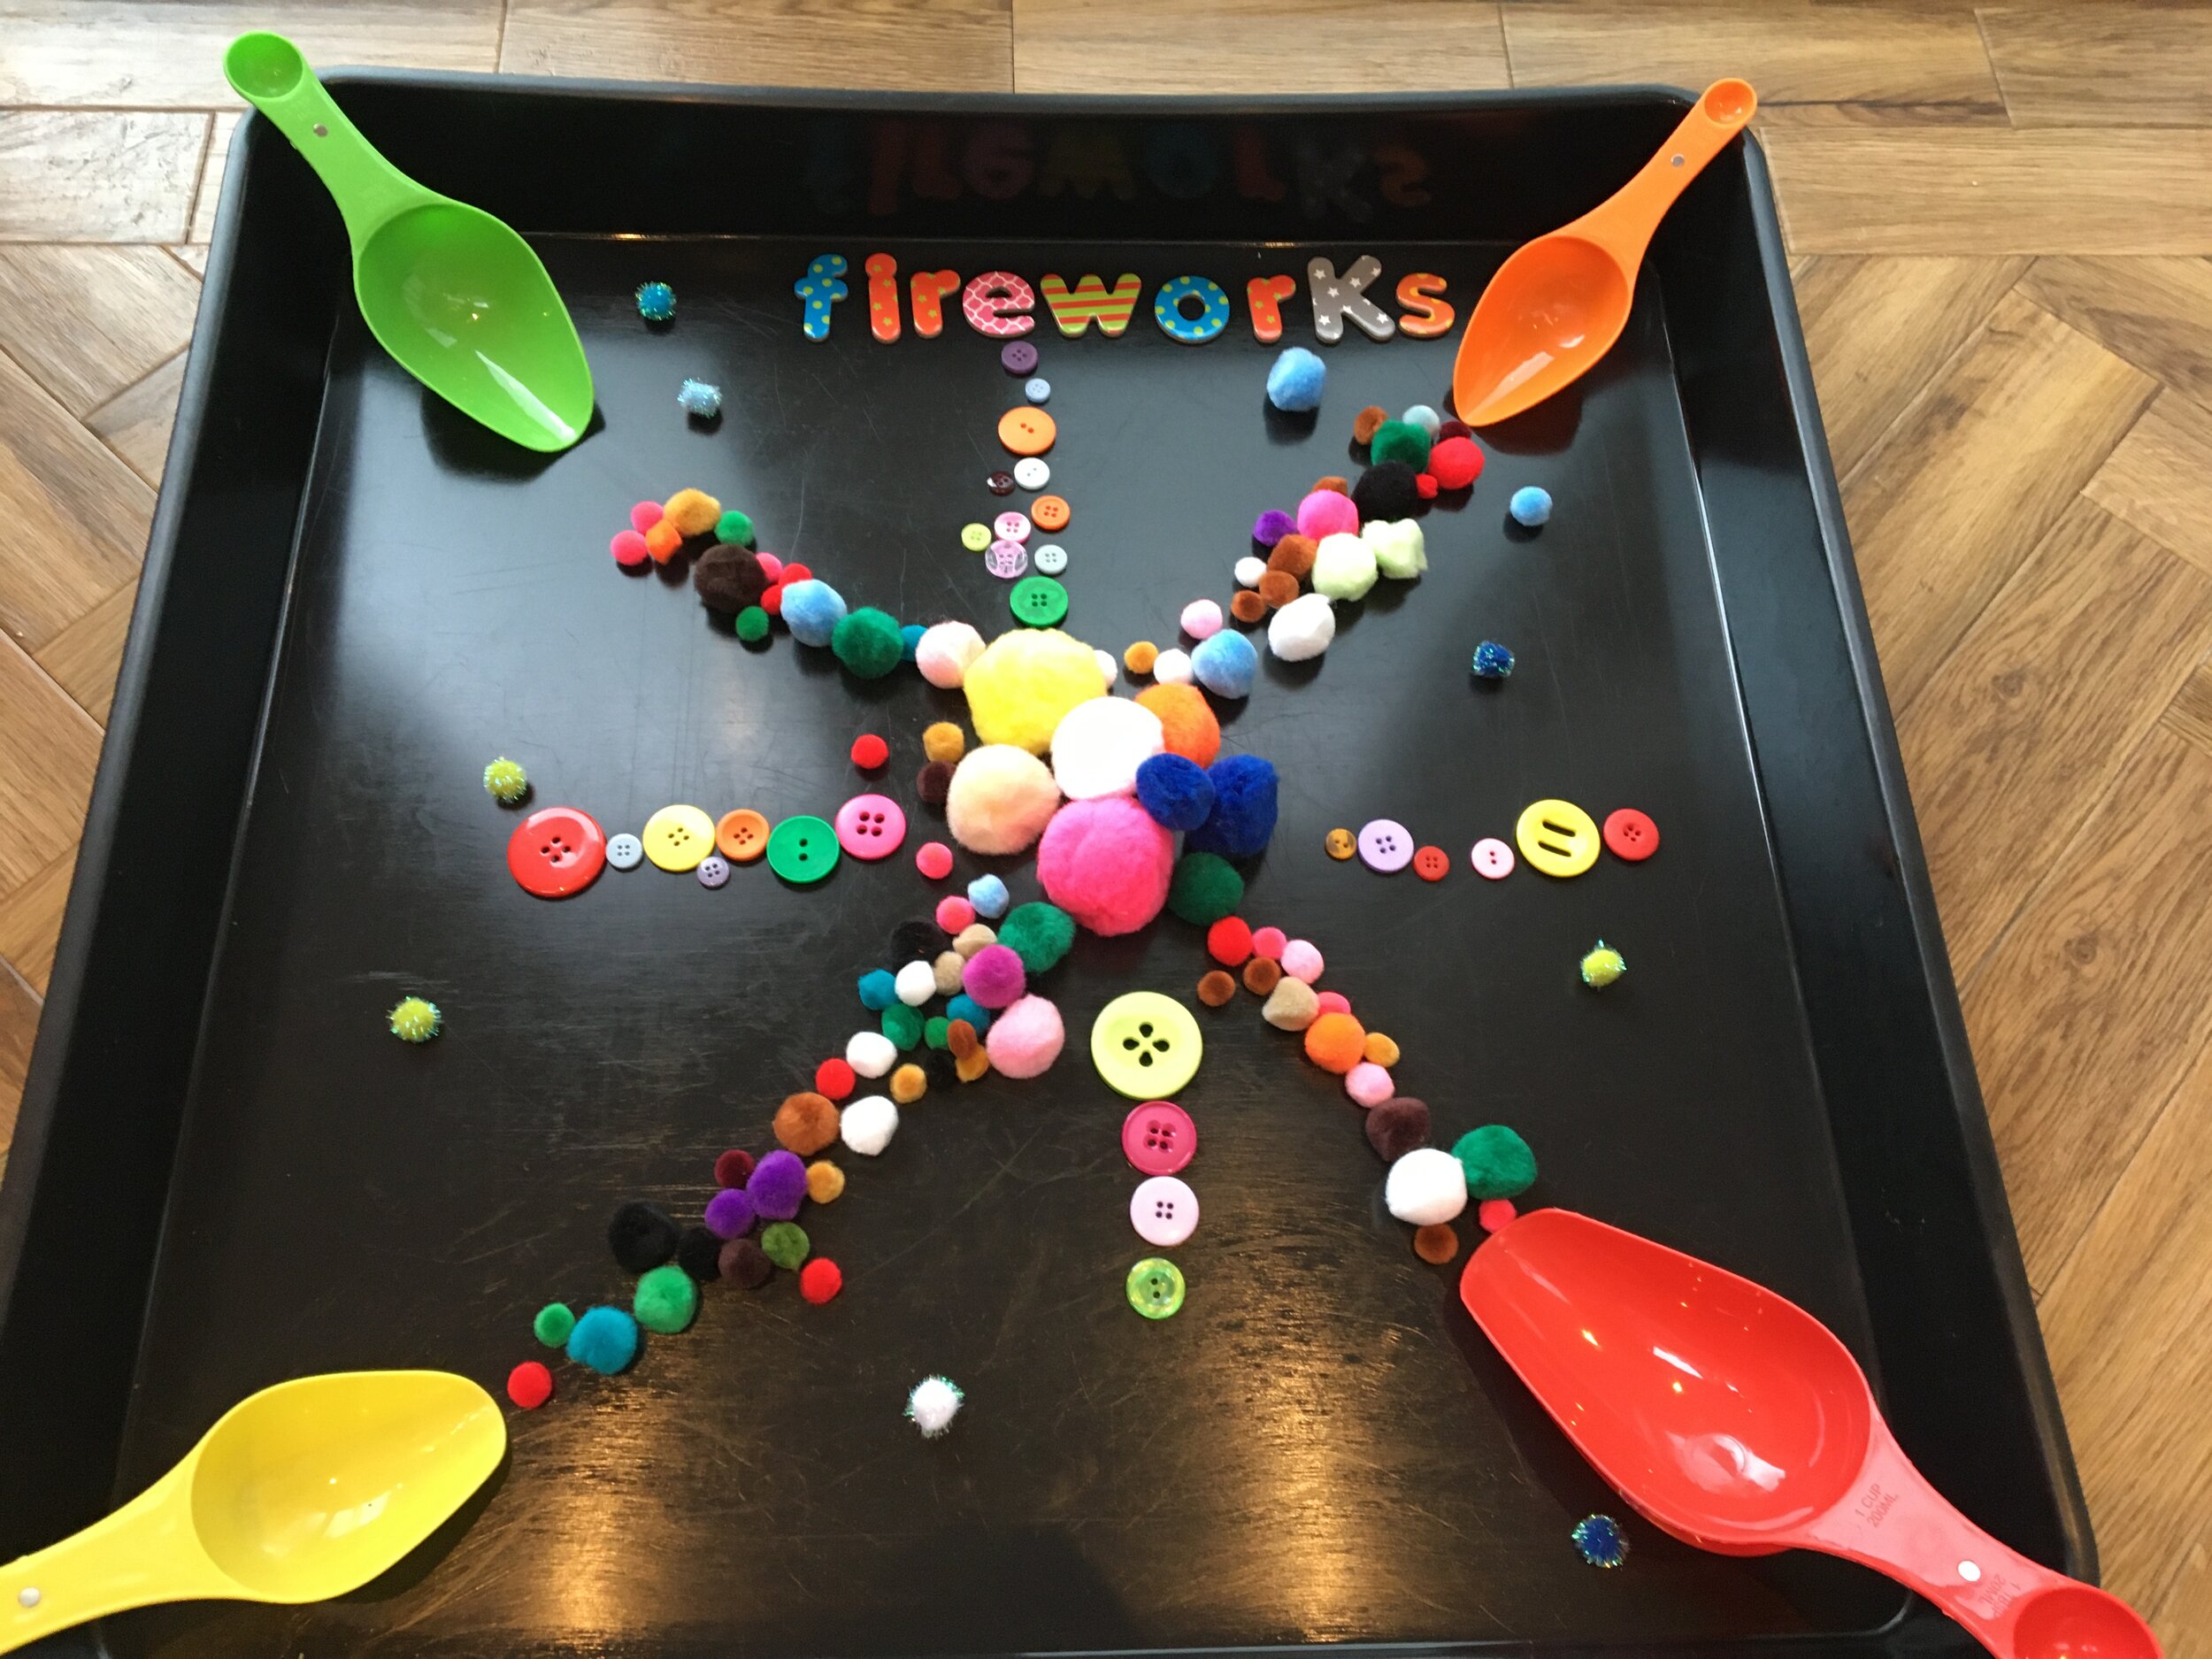 Firework activity for toddlers, babies and children to work on